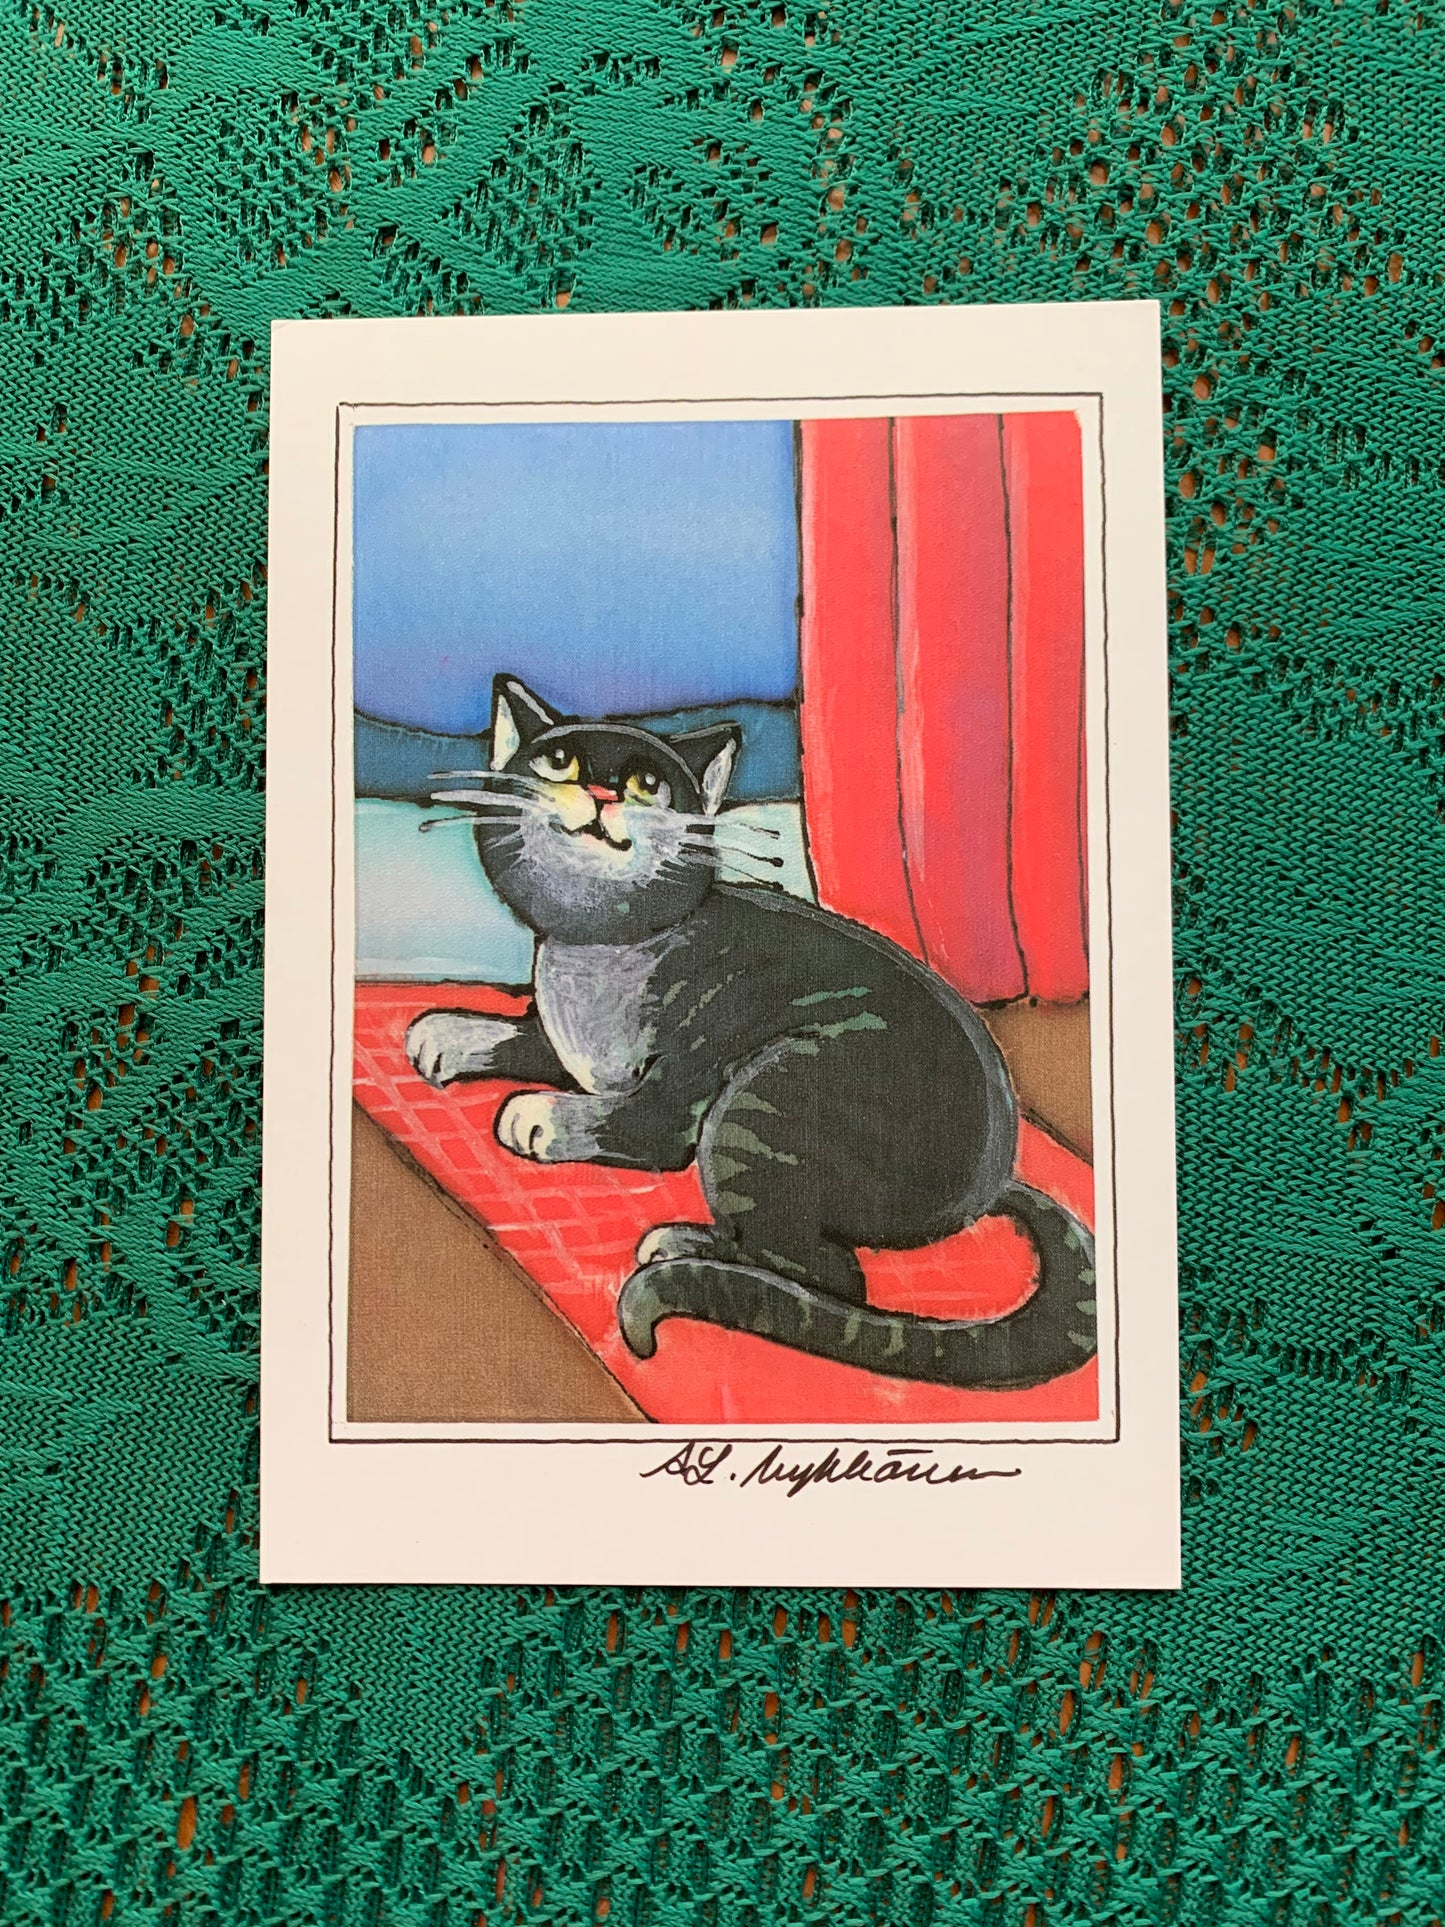 Finnish art postcard with cat - Artist A-L Mykkänen - Printed in Finland - Greeting card, collectible postcard - unused